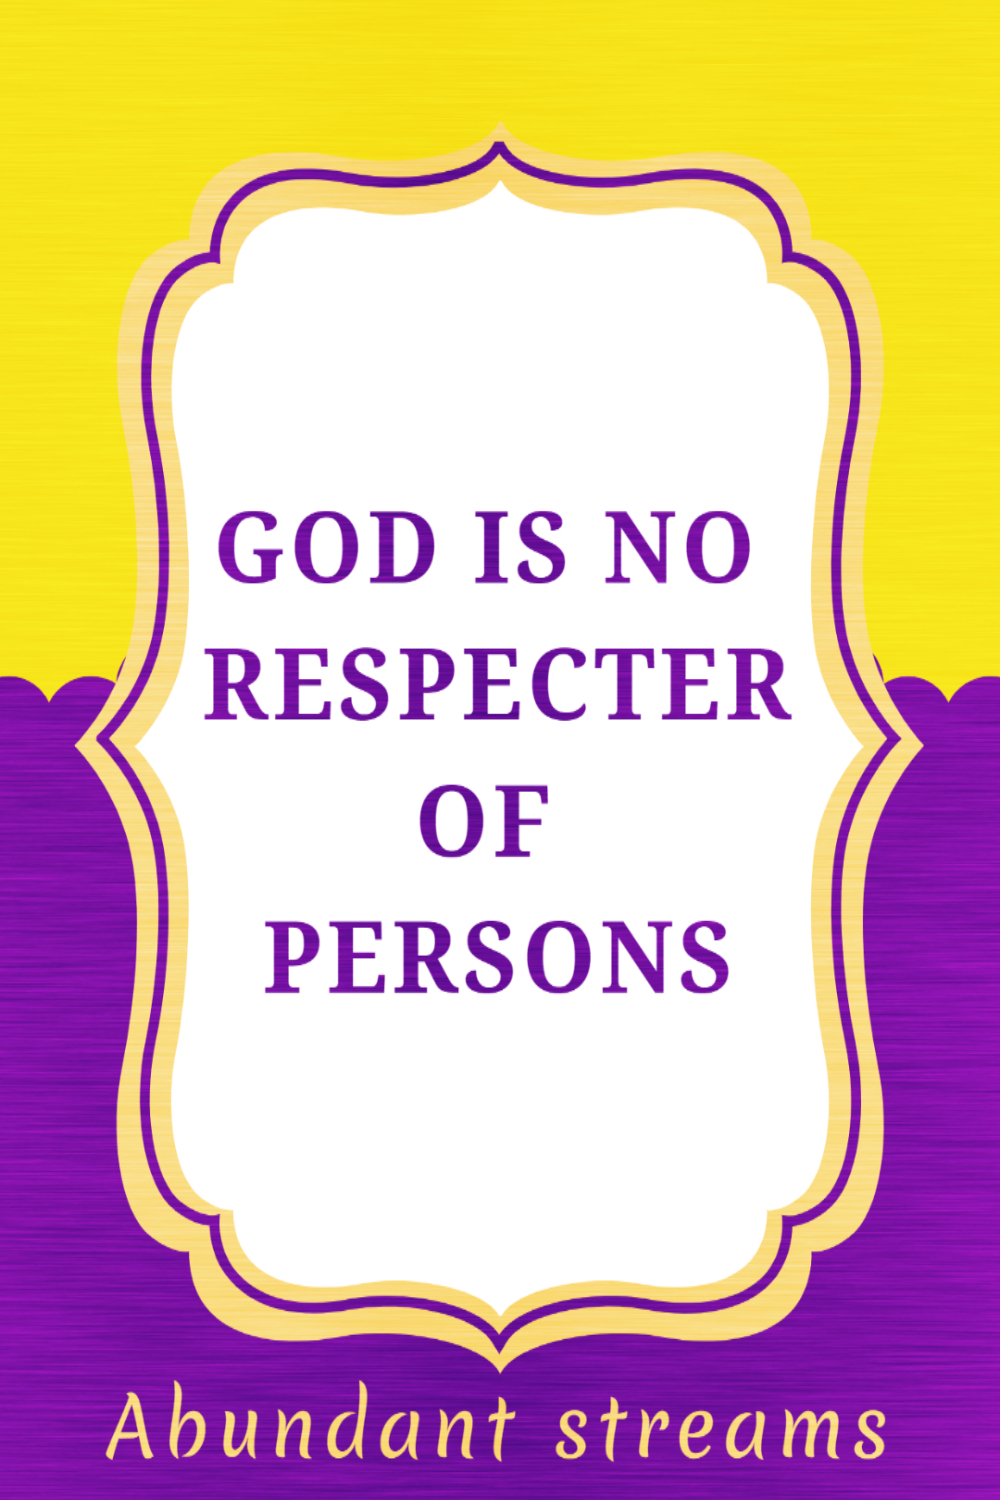 scripture about god not being a respecter of persons